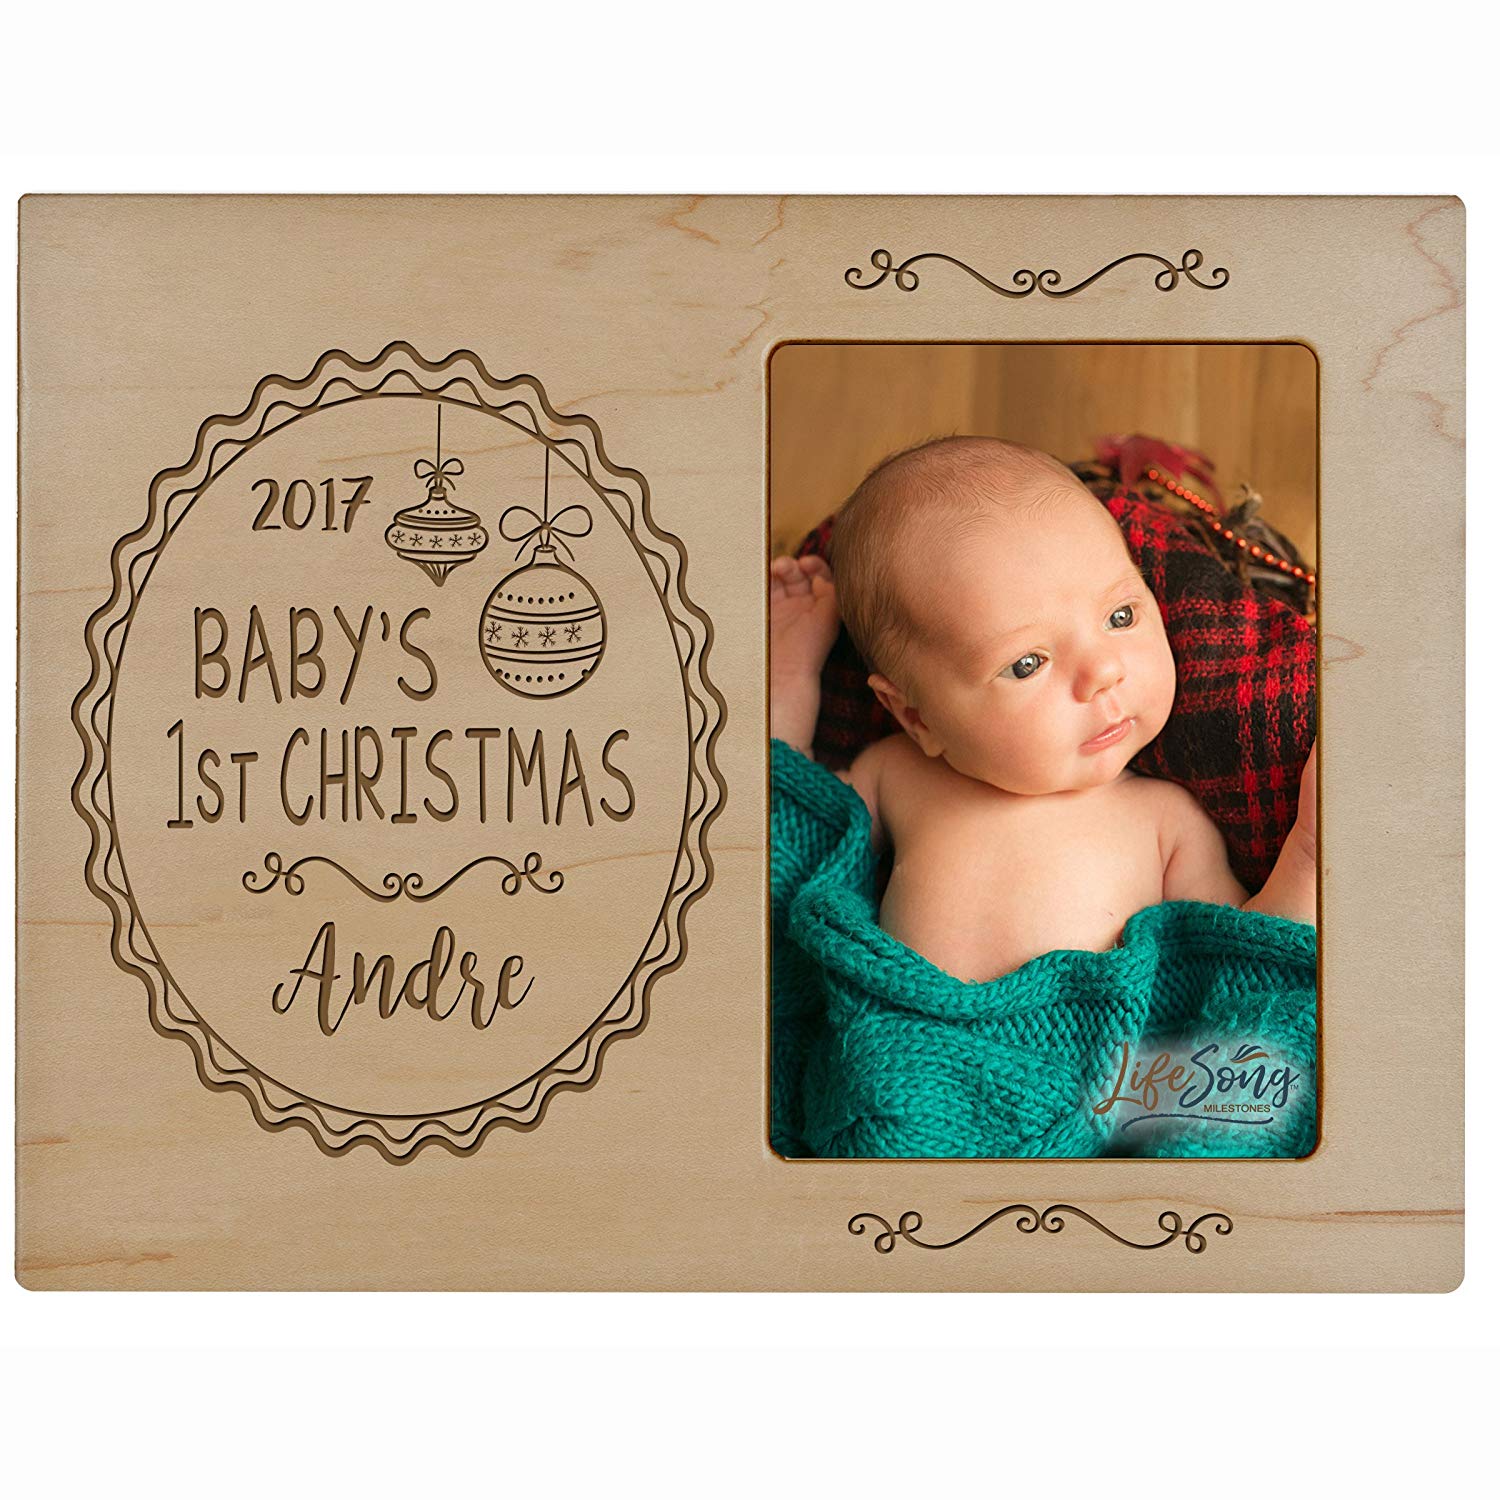 Personalized Home Christmas Ornament Design Photo Frame Holds 4x6 Photograph - LifeSong Milestones